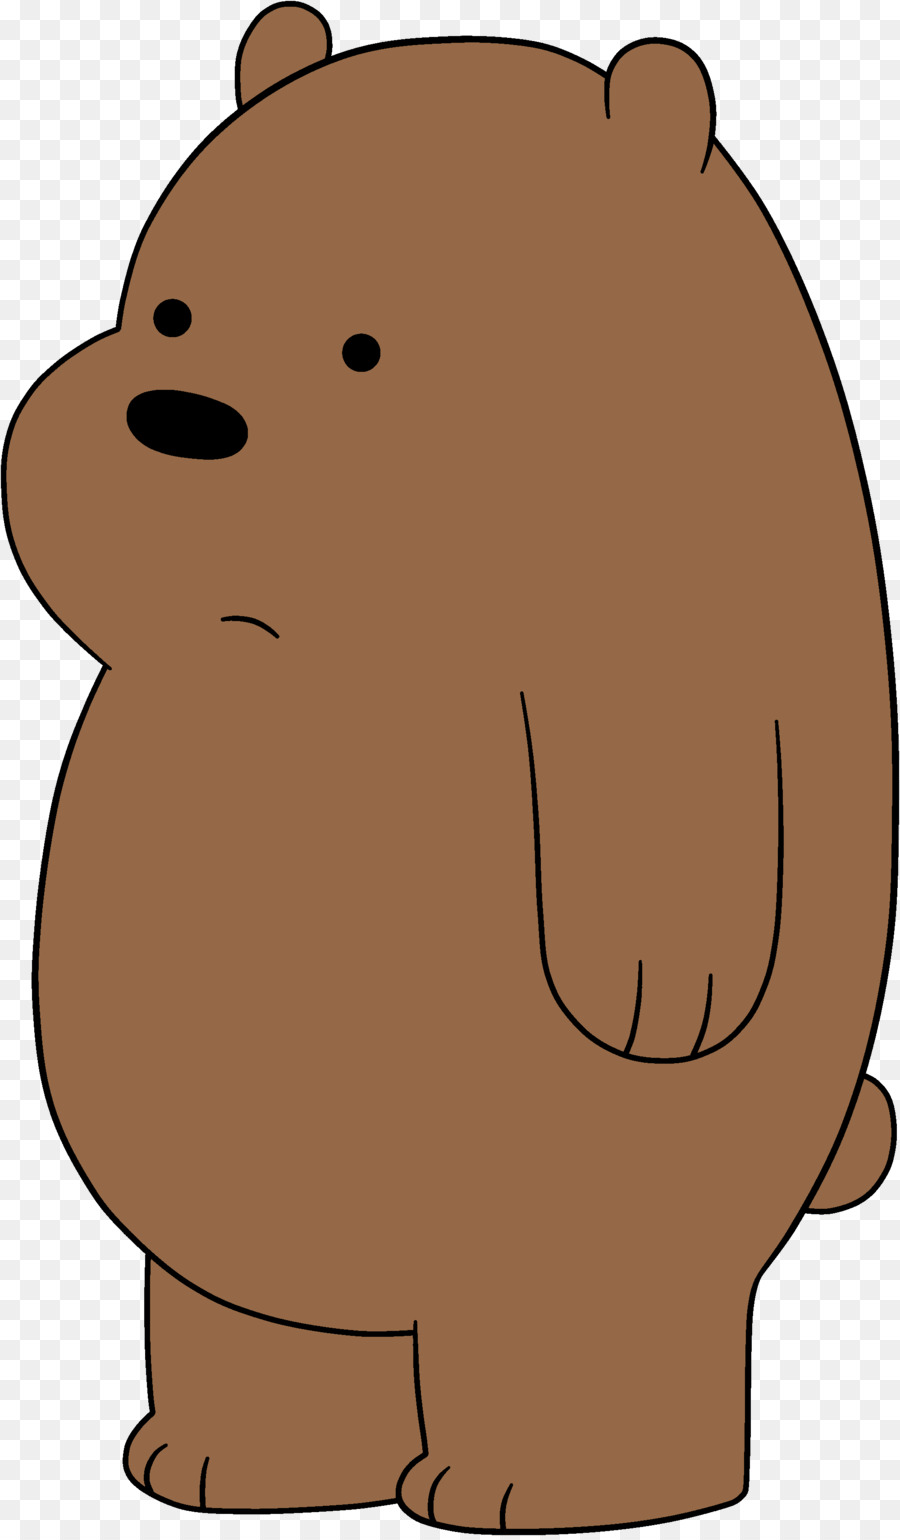 Grizzly bear Baby Grizzly Giant panda Cartoon Network - bears png download - 1997*3408 - Free Transparent Bear png Download.